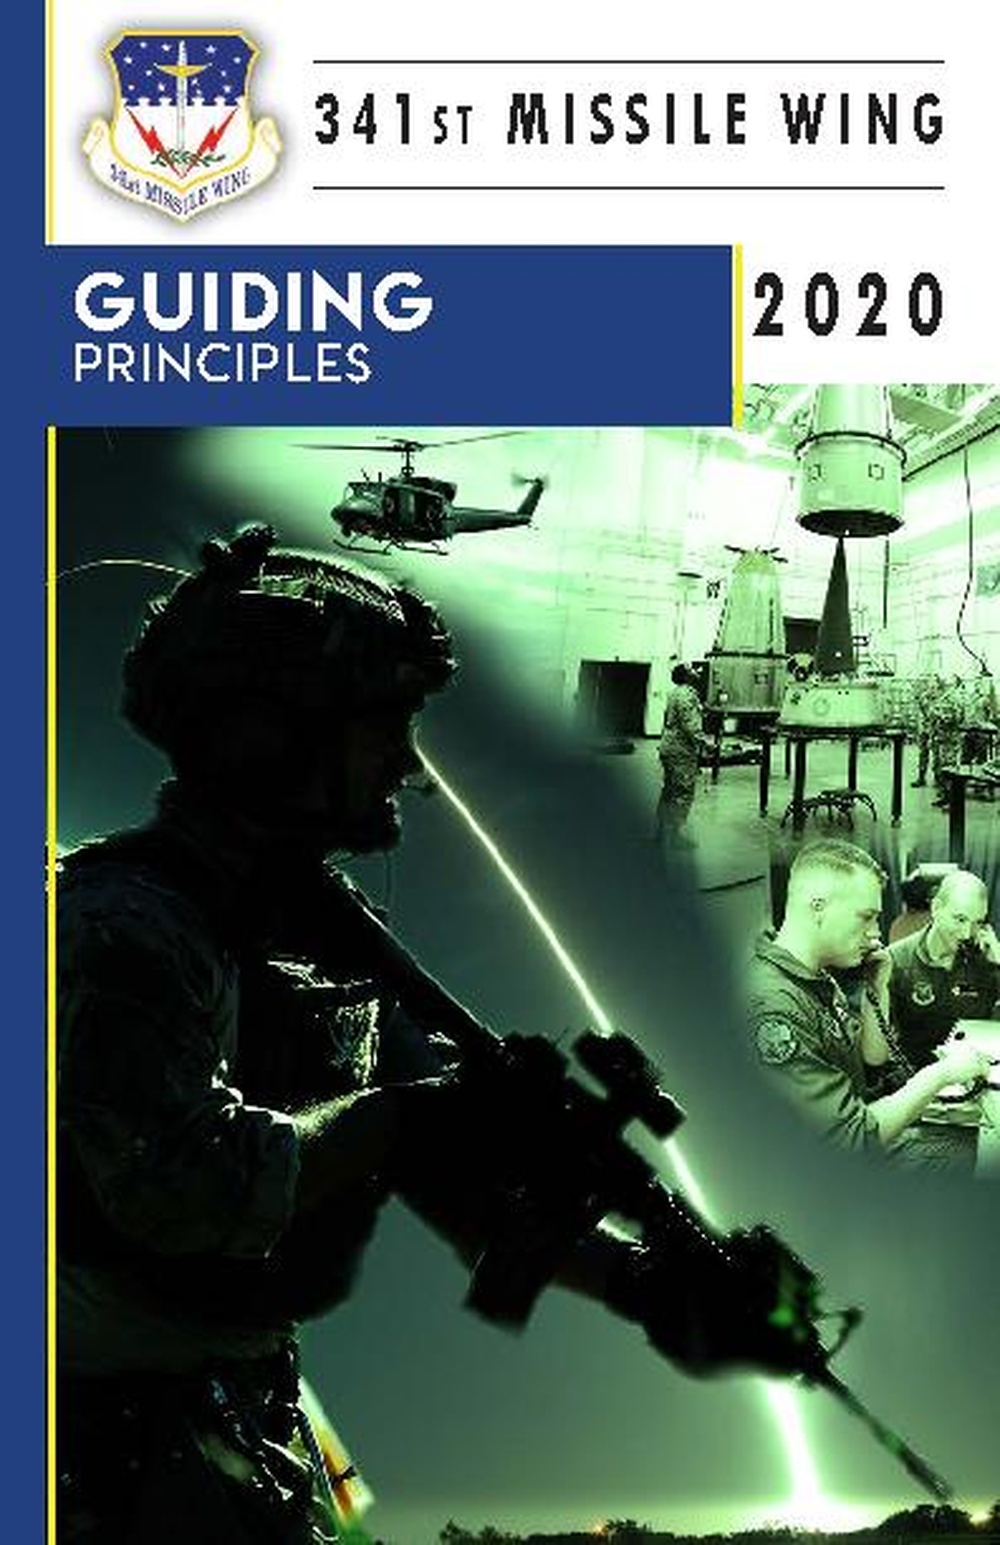 341st Missile Wing Guiding Principles Booklet 2020